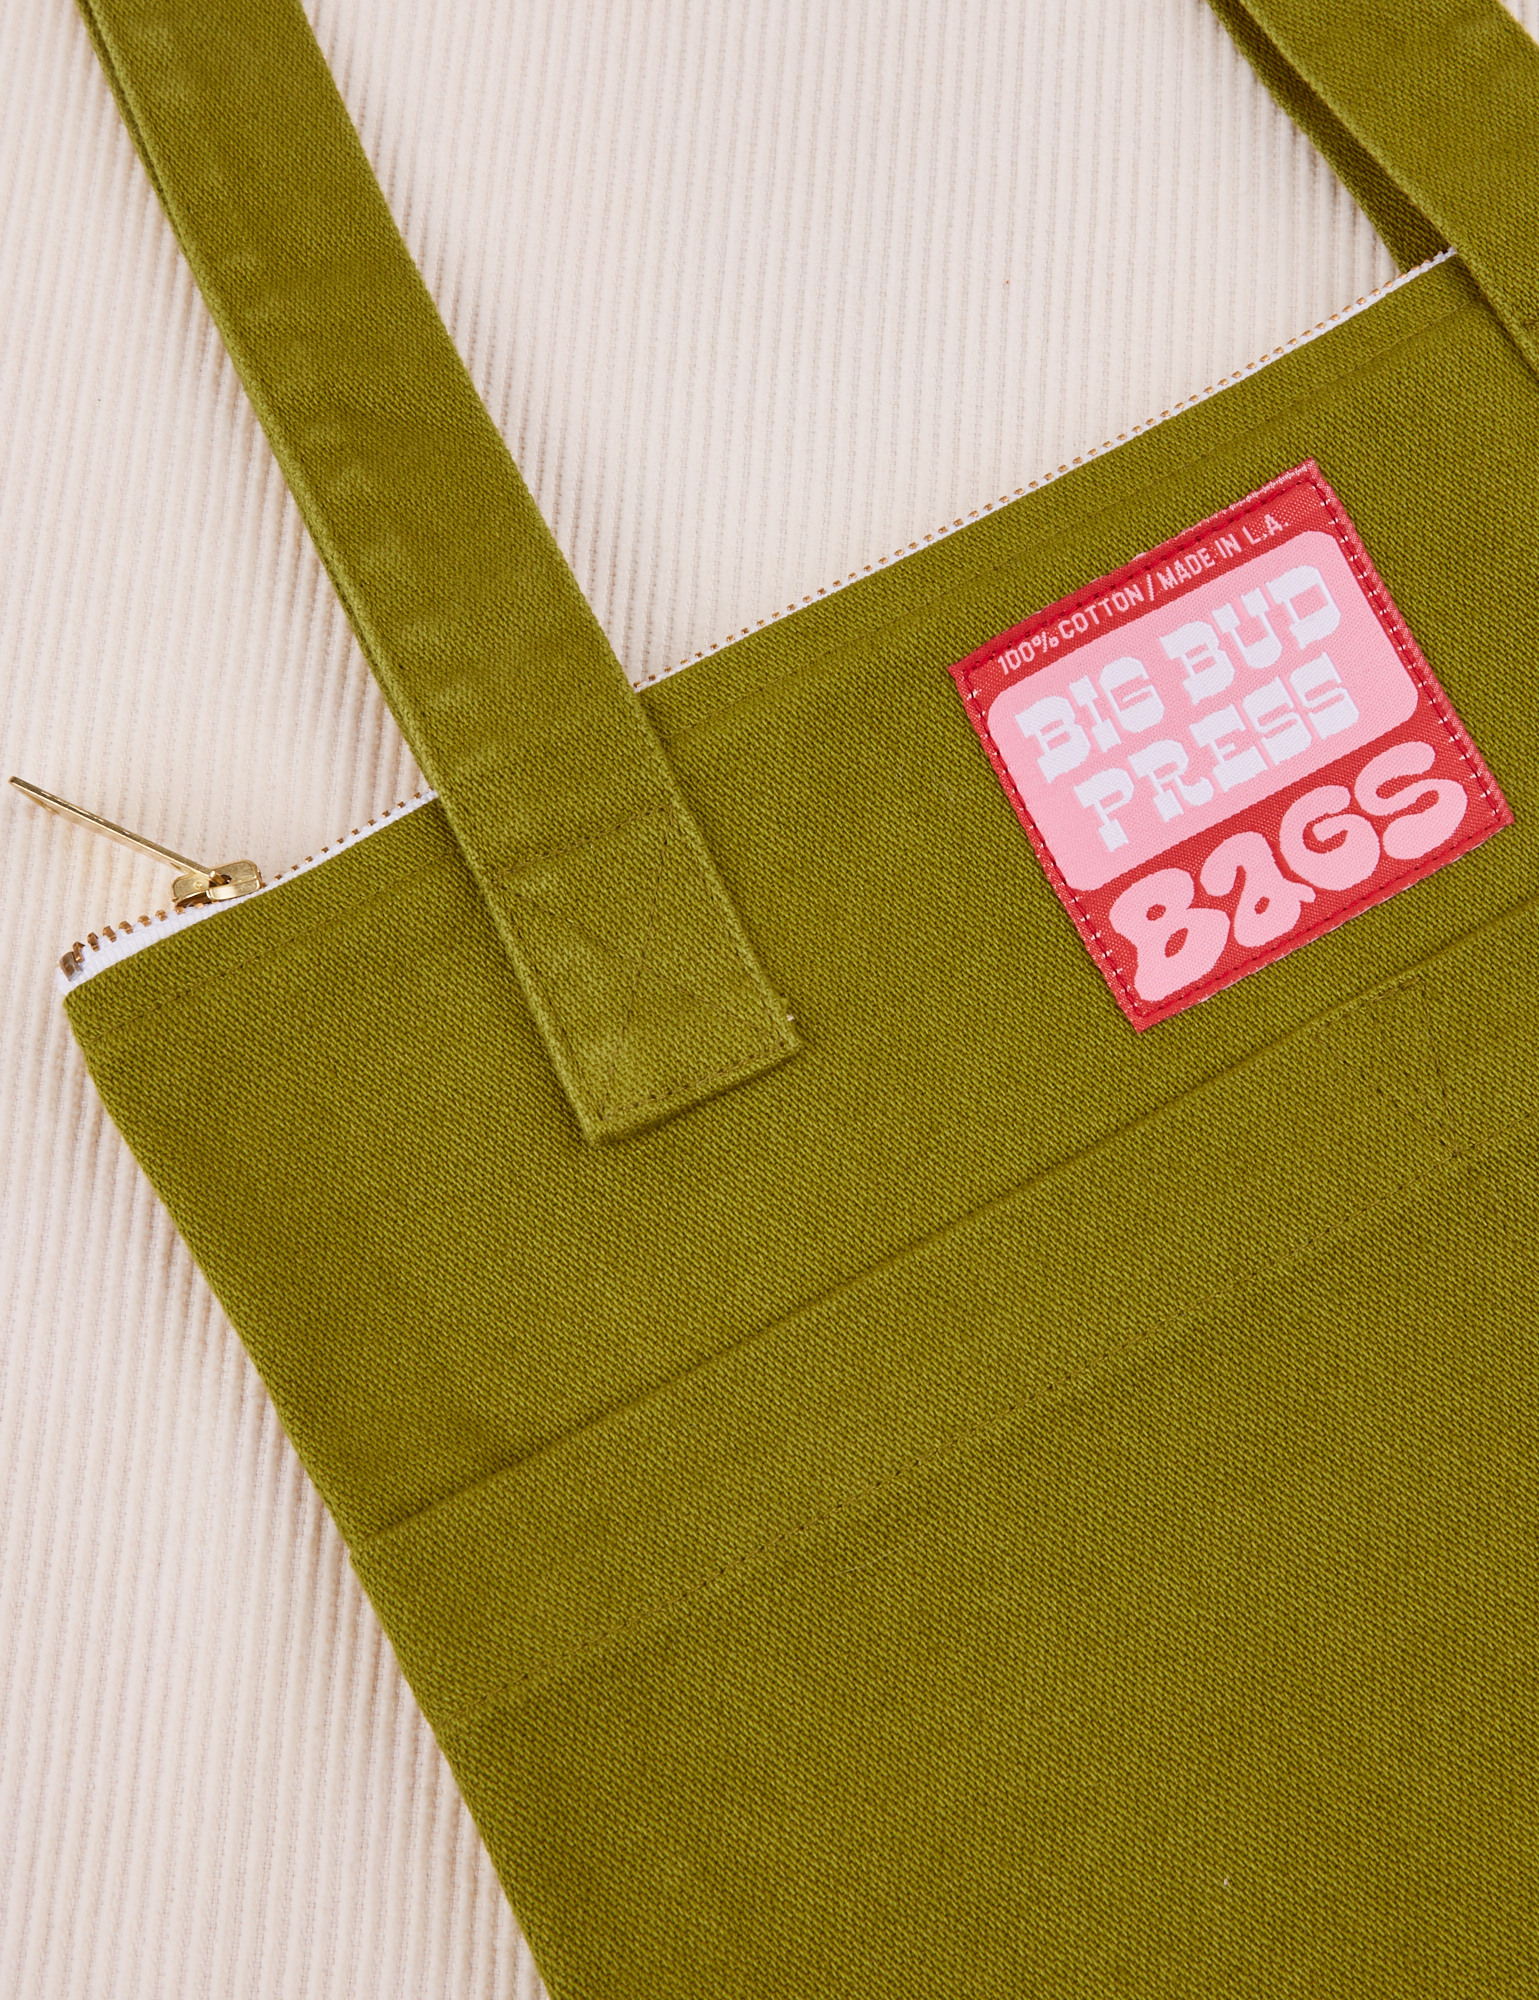 Over-Shoulder Zip Mini Tote in Olive Green close up